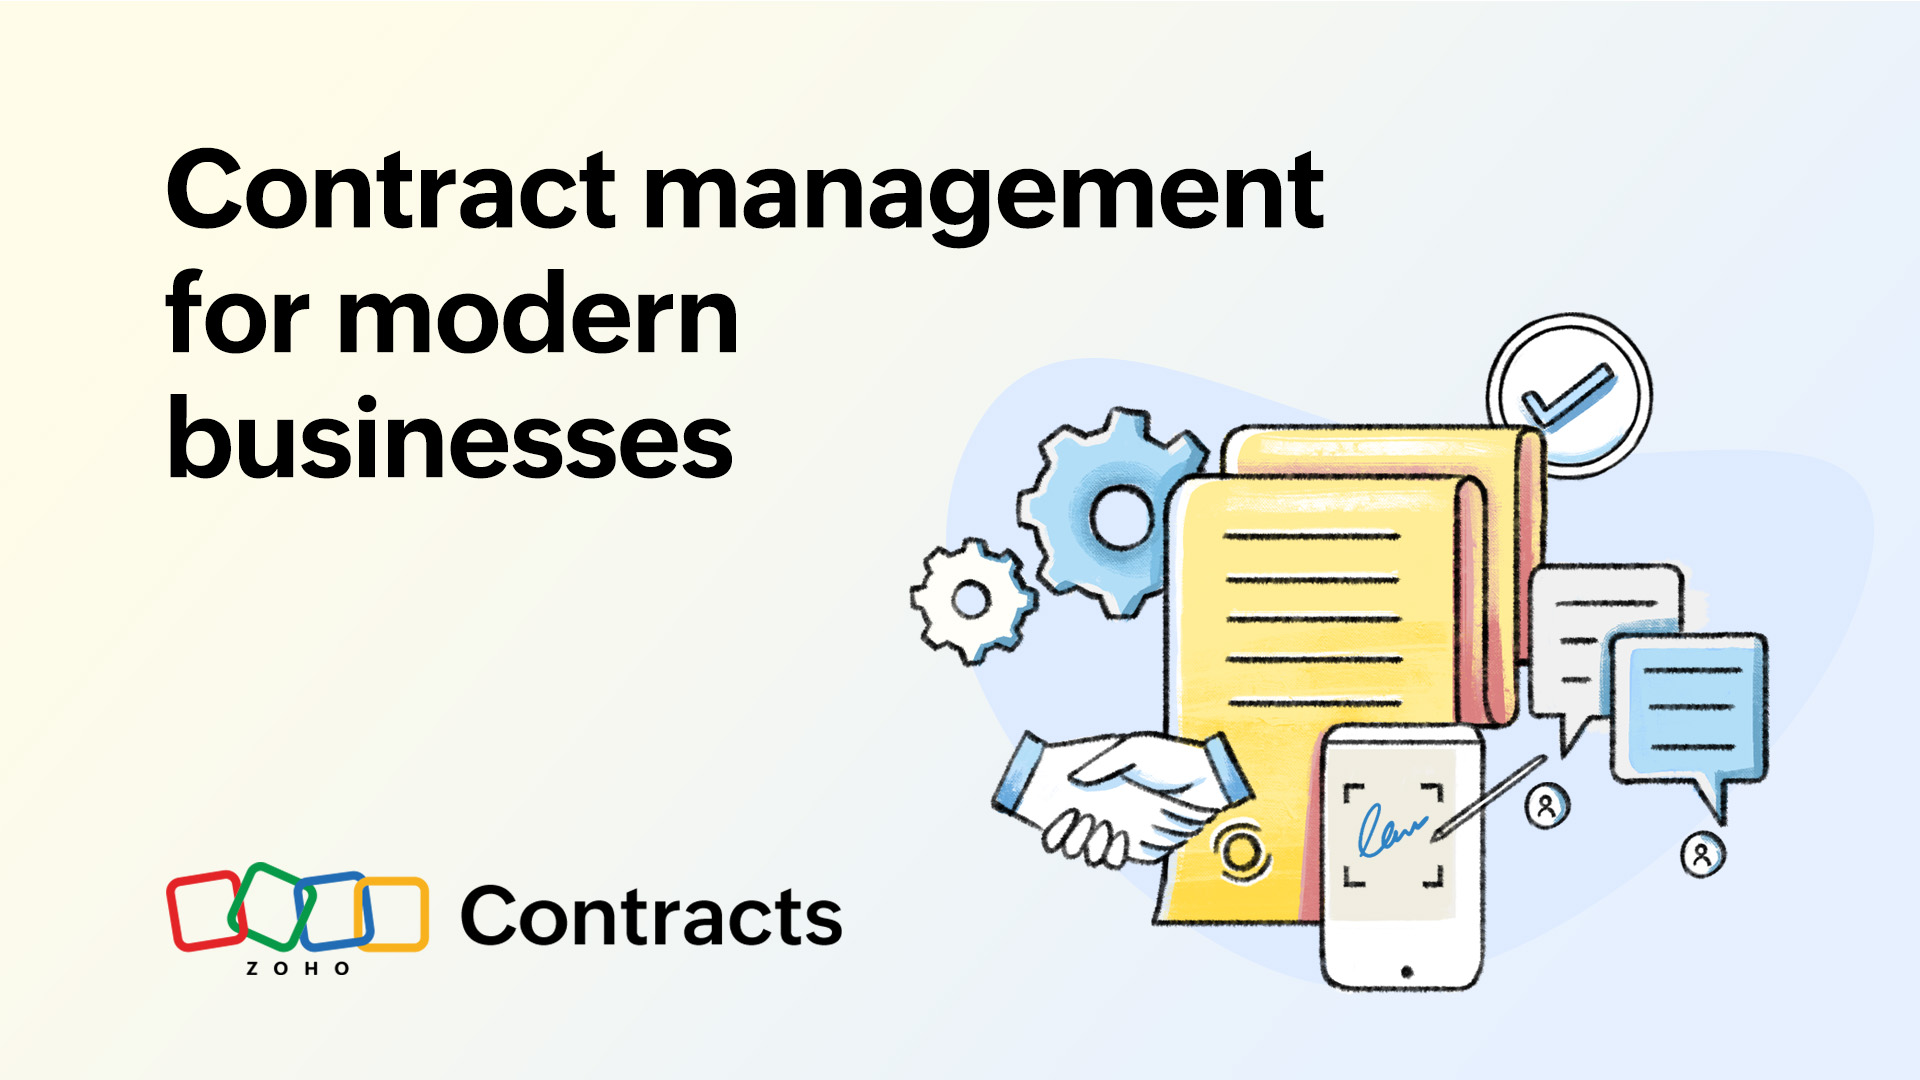 Best practices in contract management